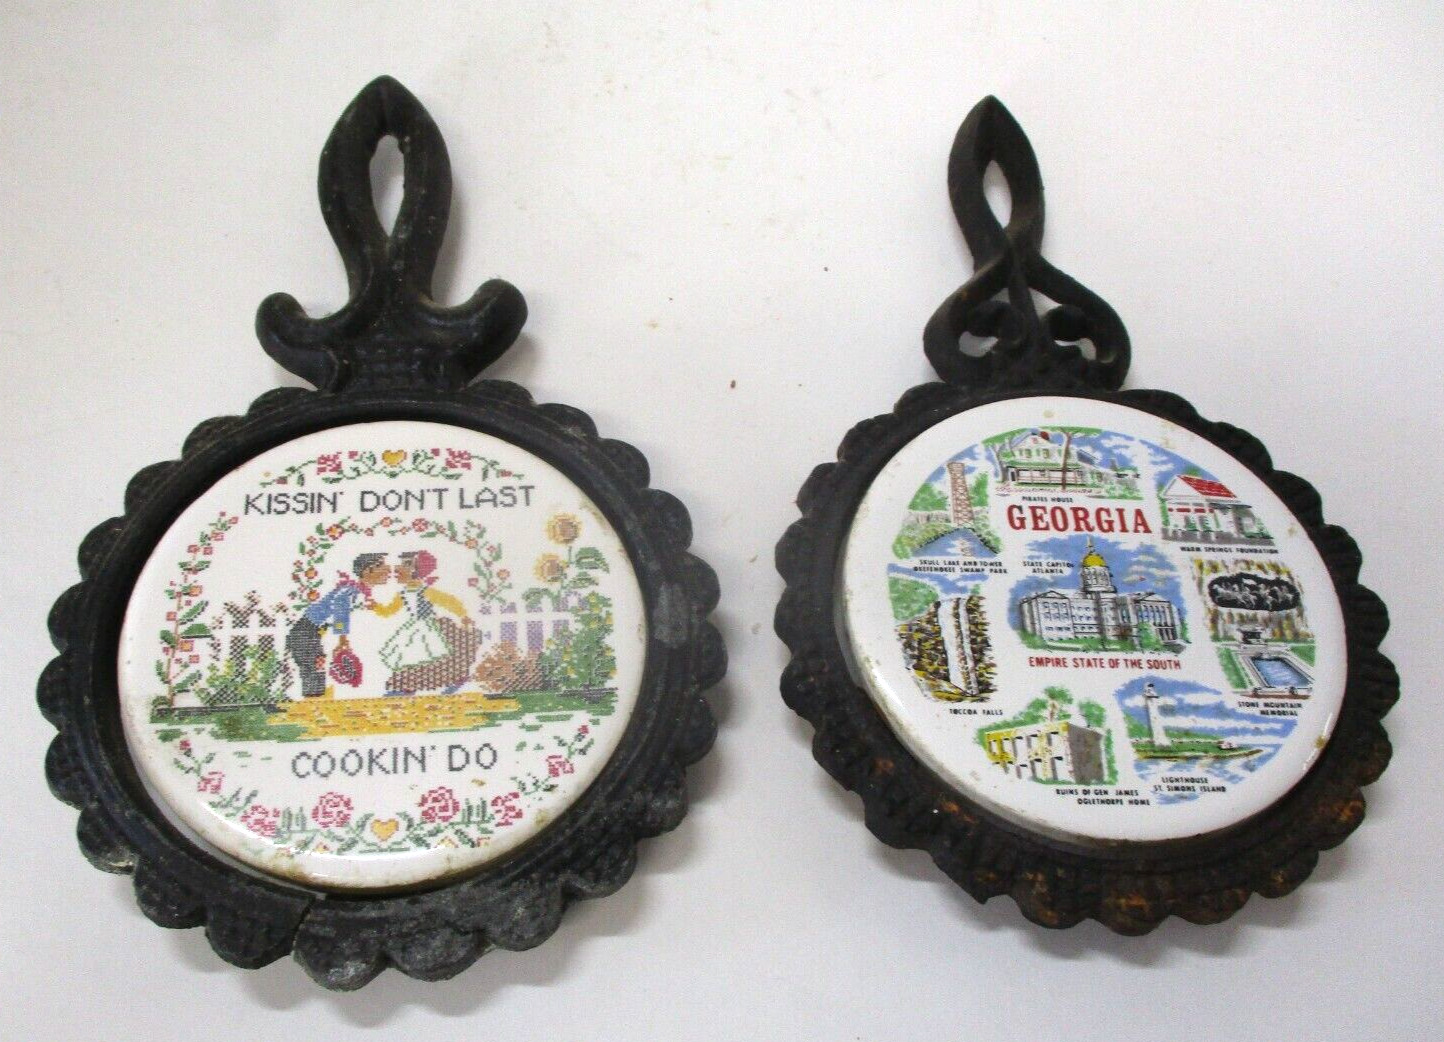 Two Vintage Metal Trivet with Deco Ceramic Tiles .. Georgia and Novelty